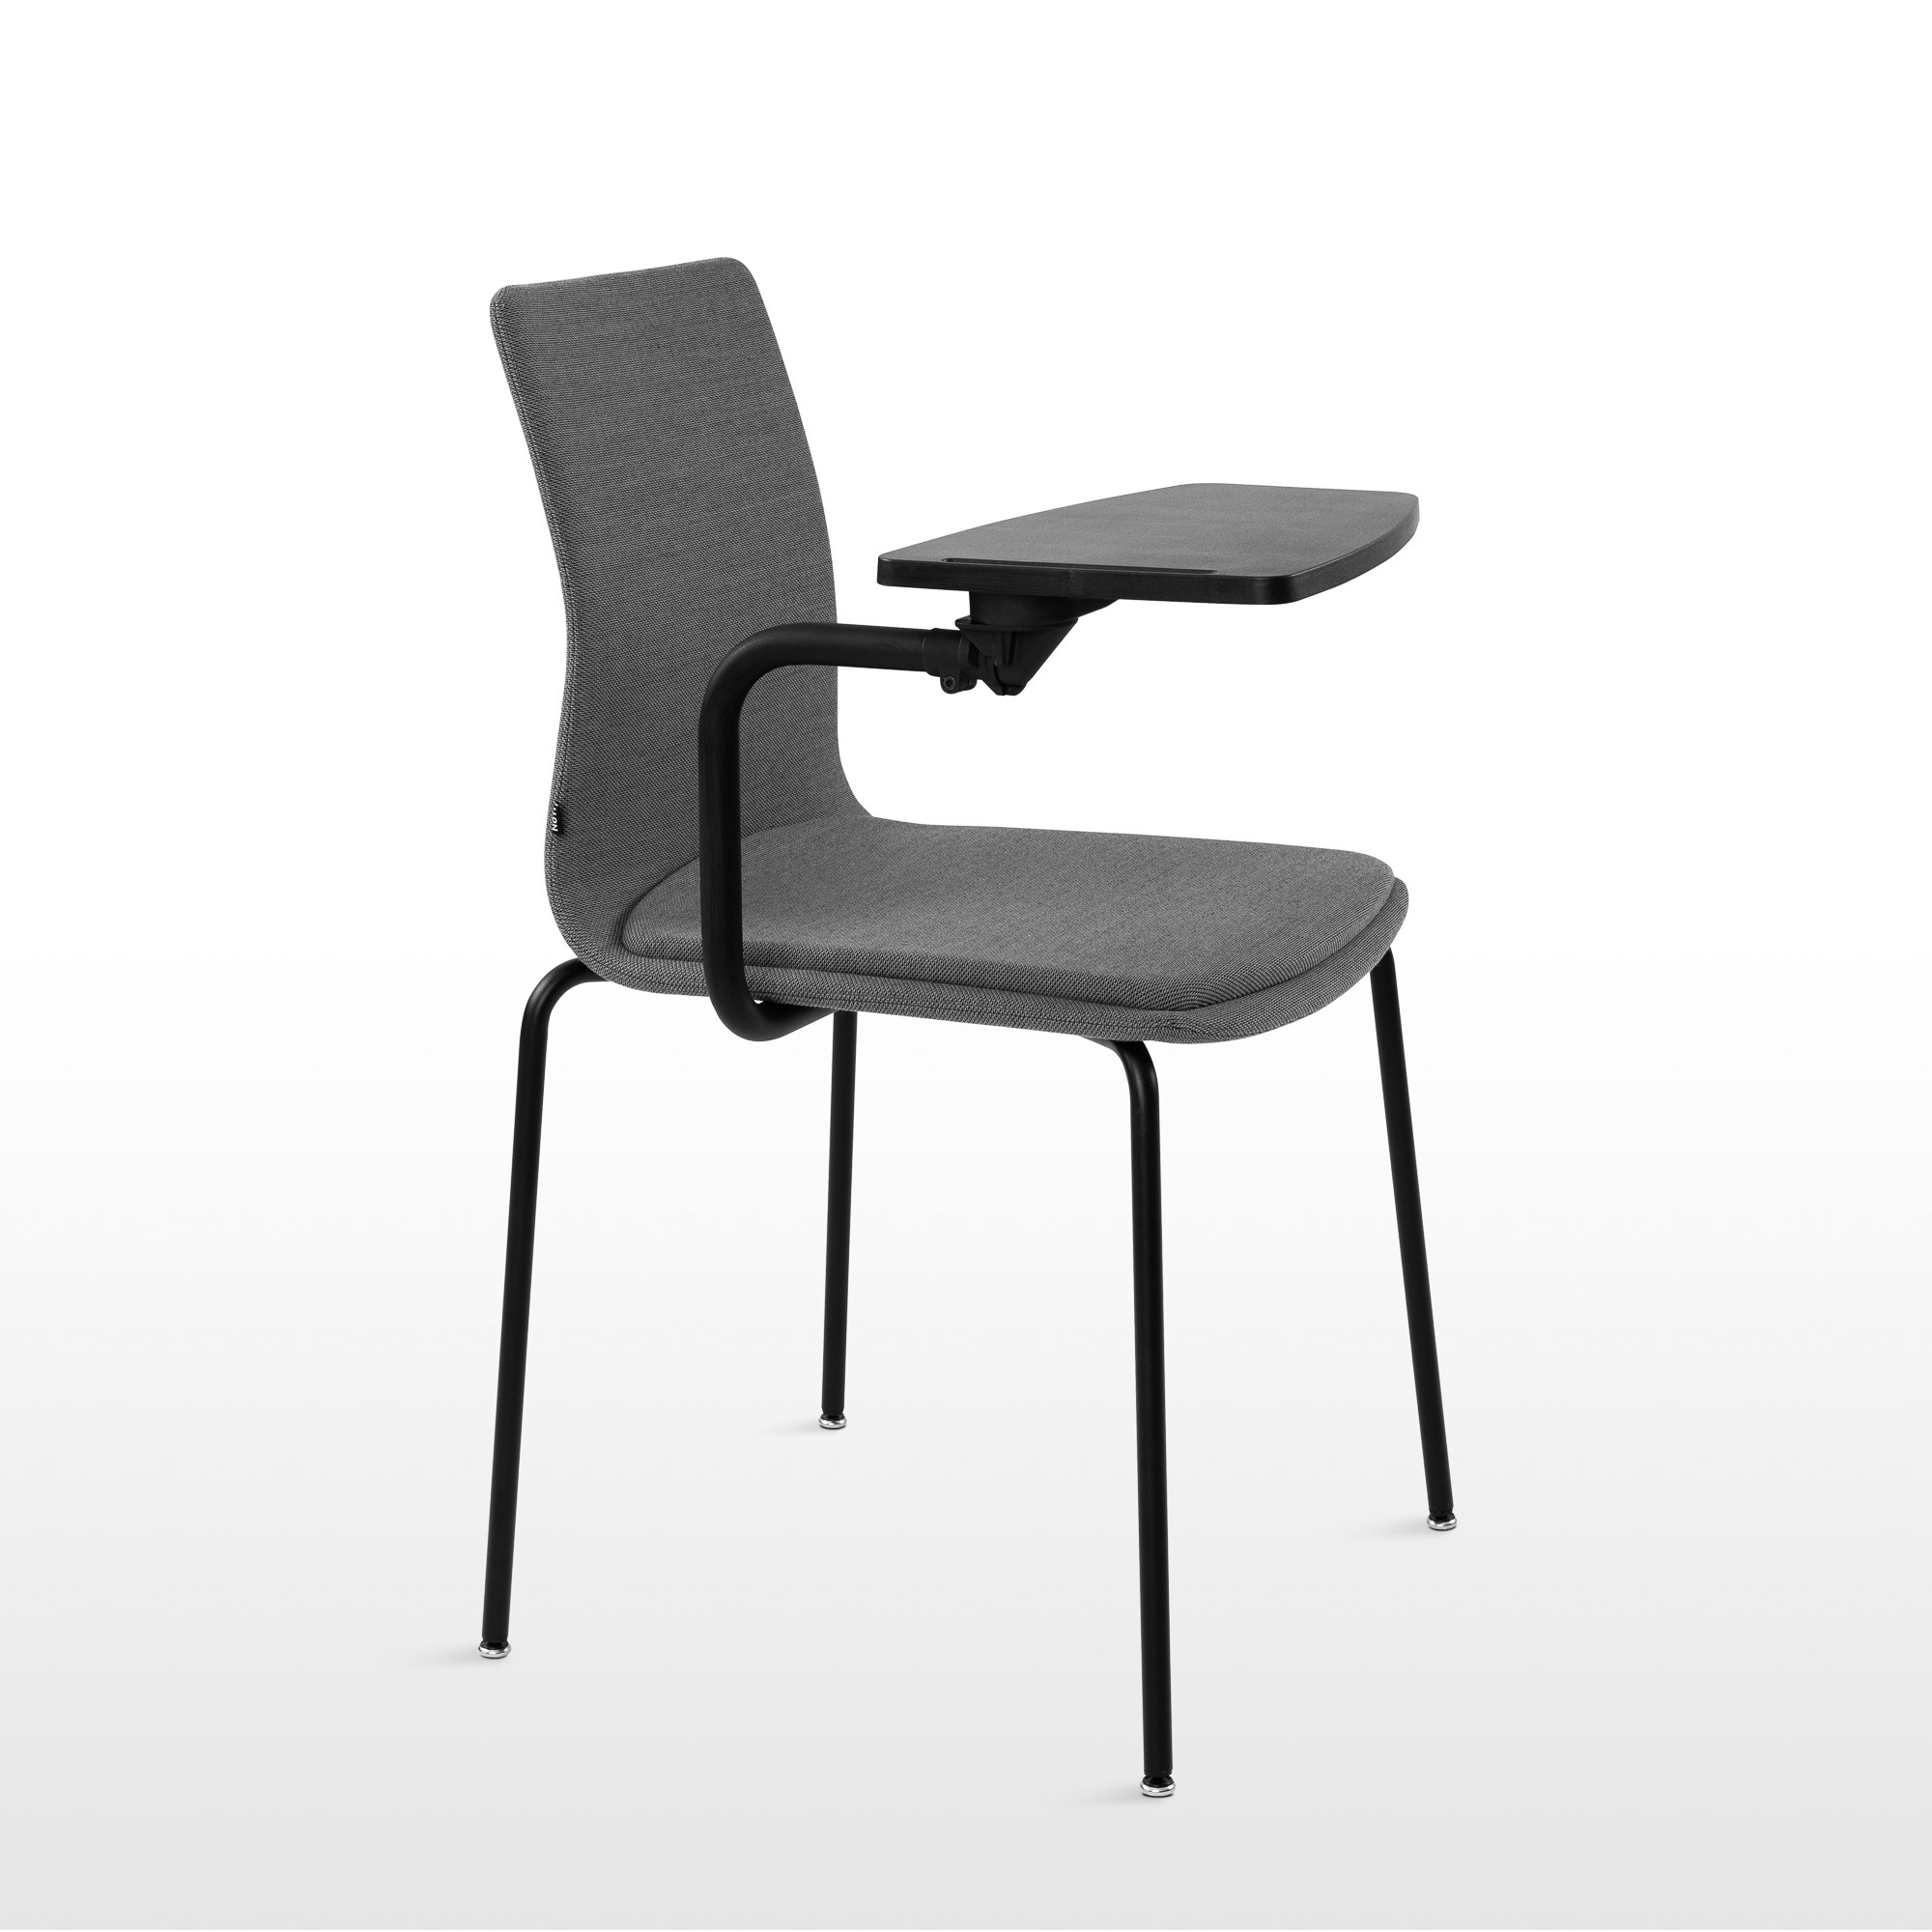 LINAR_packshot_chair with table2